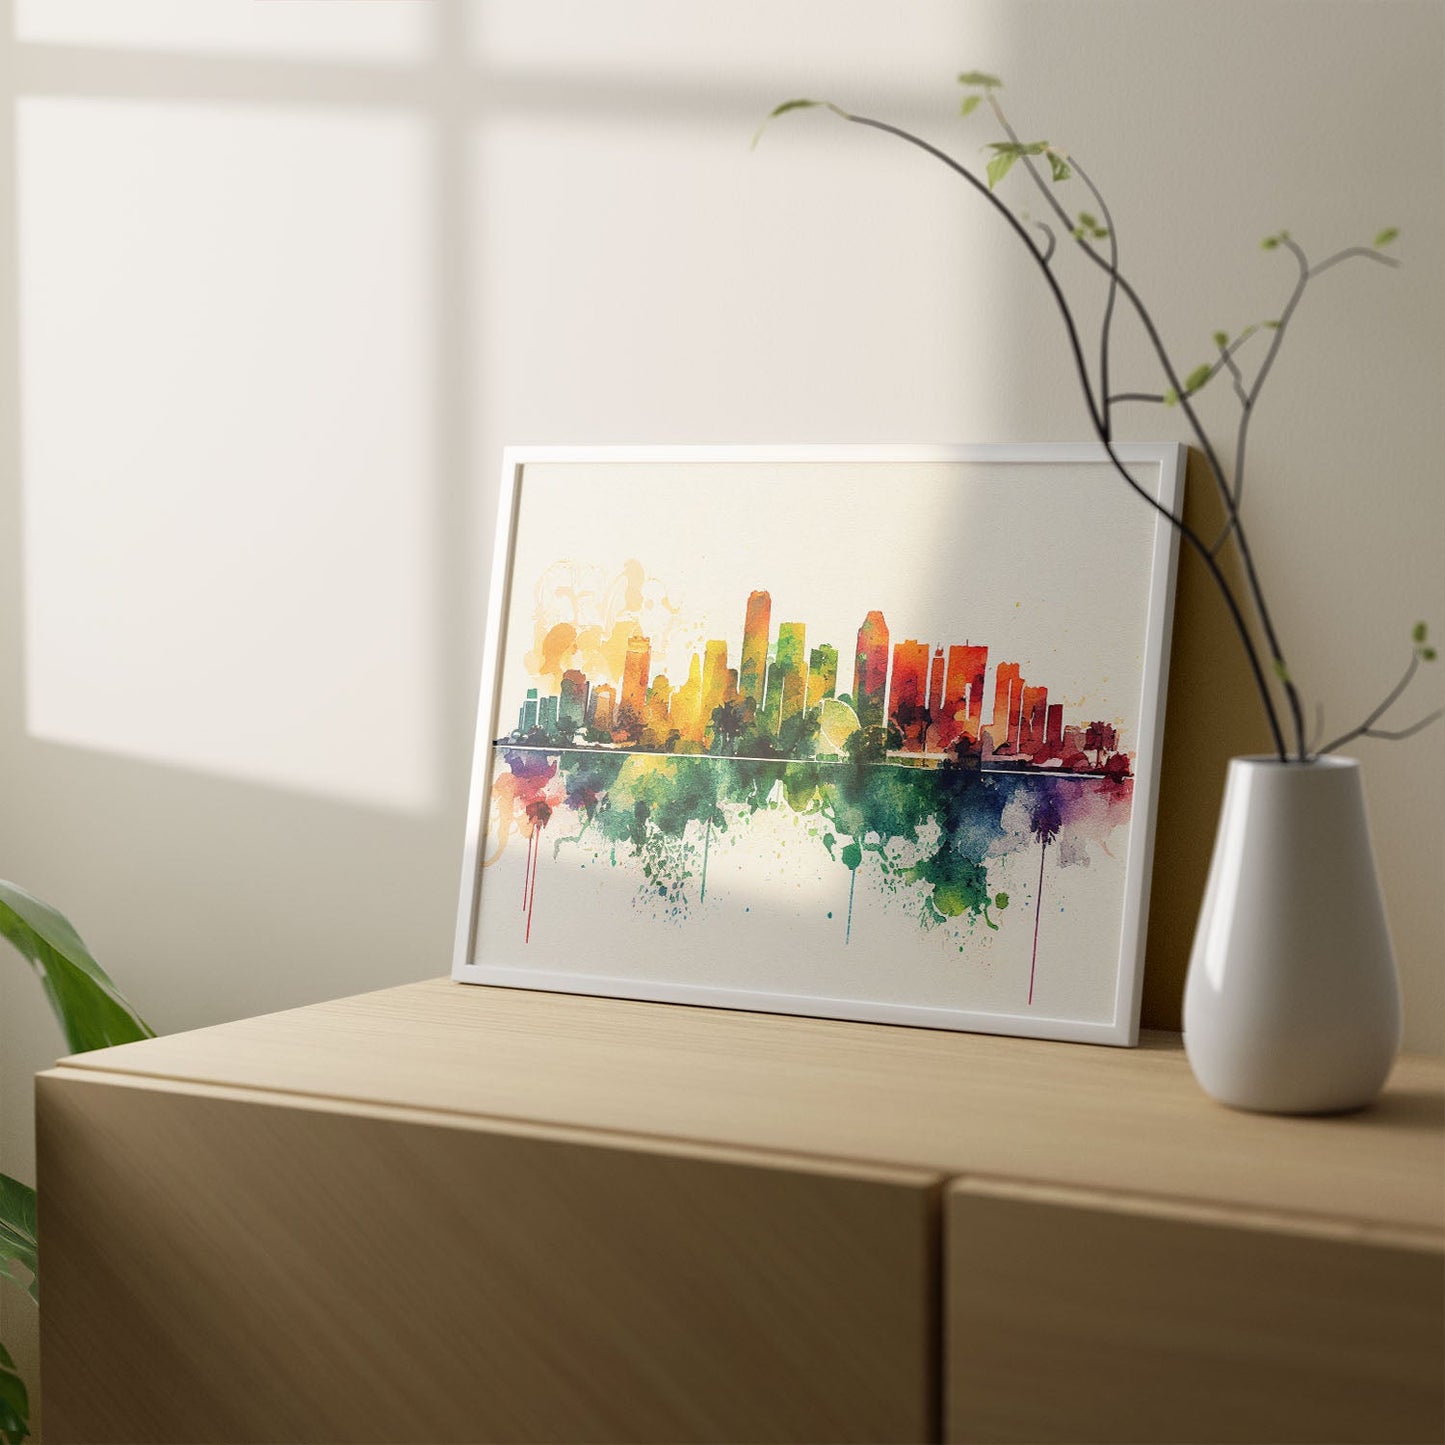 Nacnic watercolor of a skyline of the city of Miami_1. Aesthetic Wall Art Prints for Bedroom or Living Room Design.